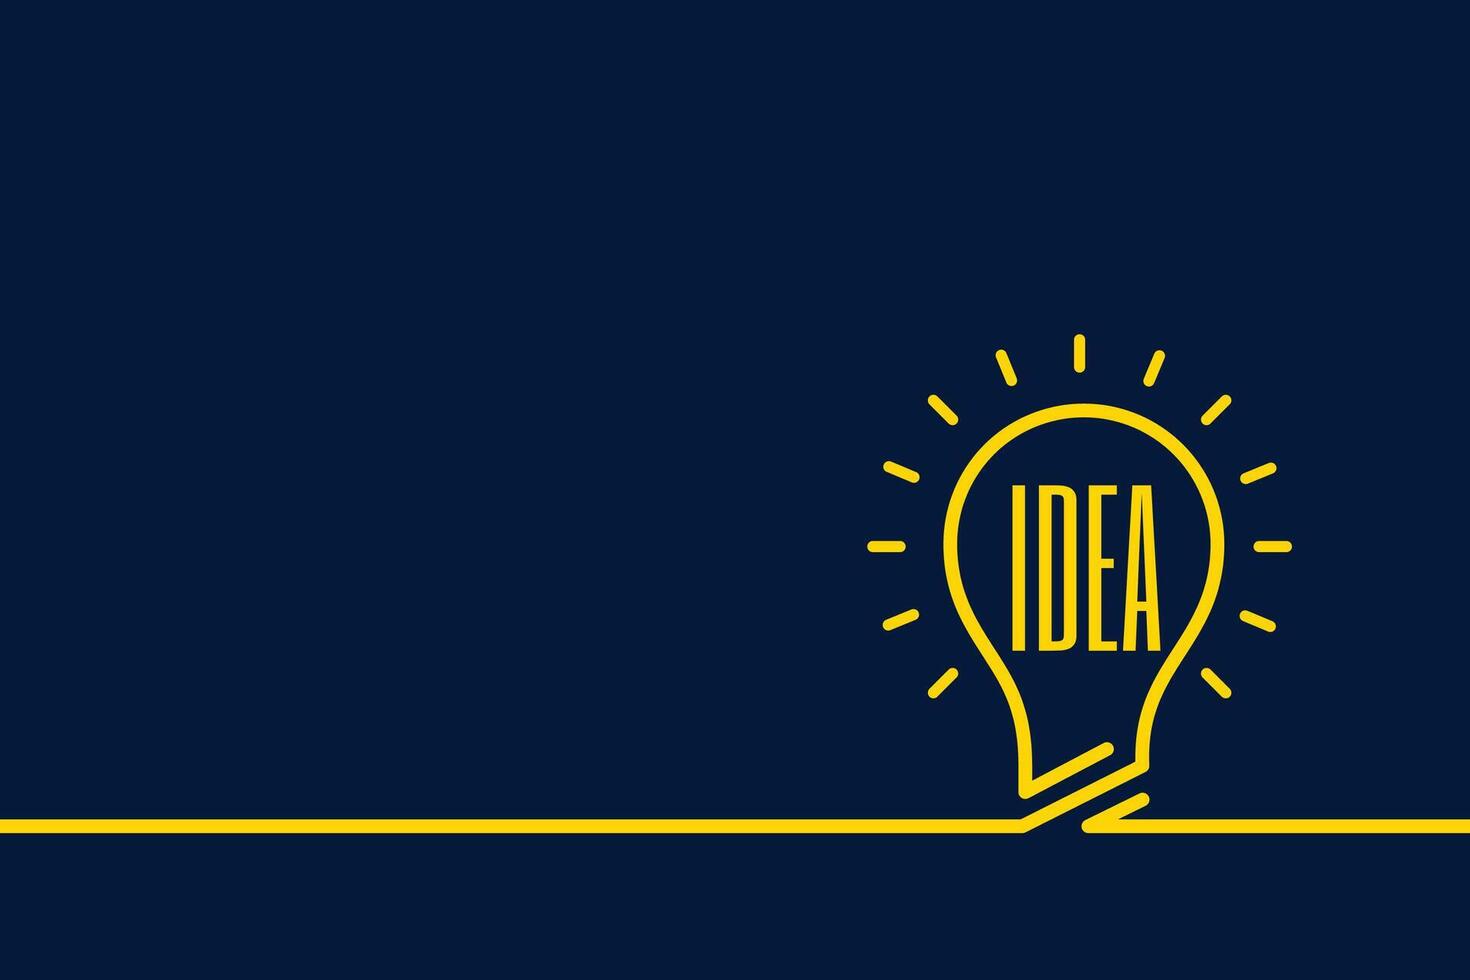 solution thinking idea concept with light bulb and text space vector